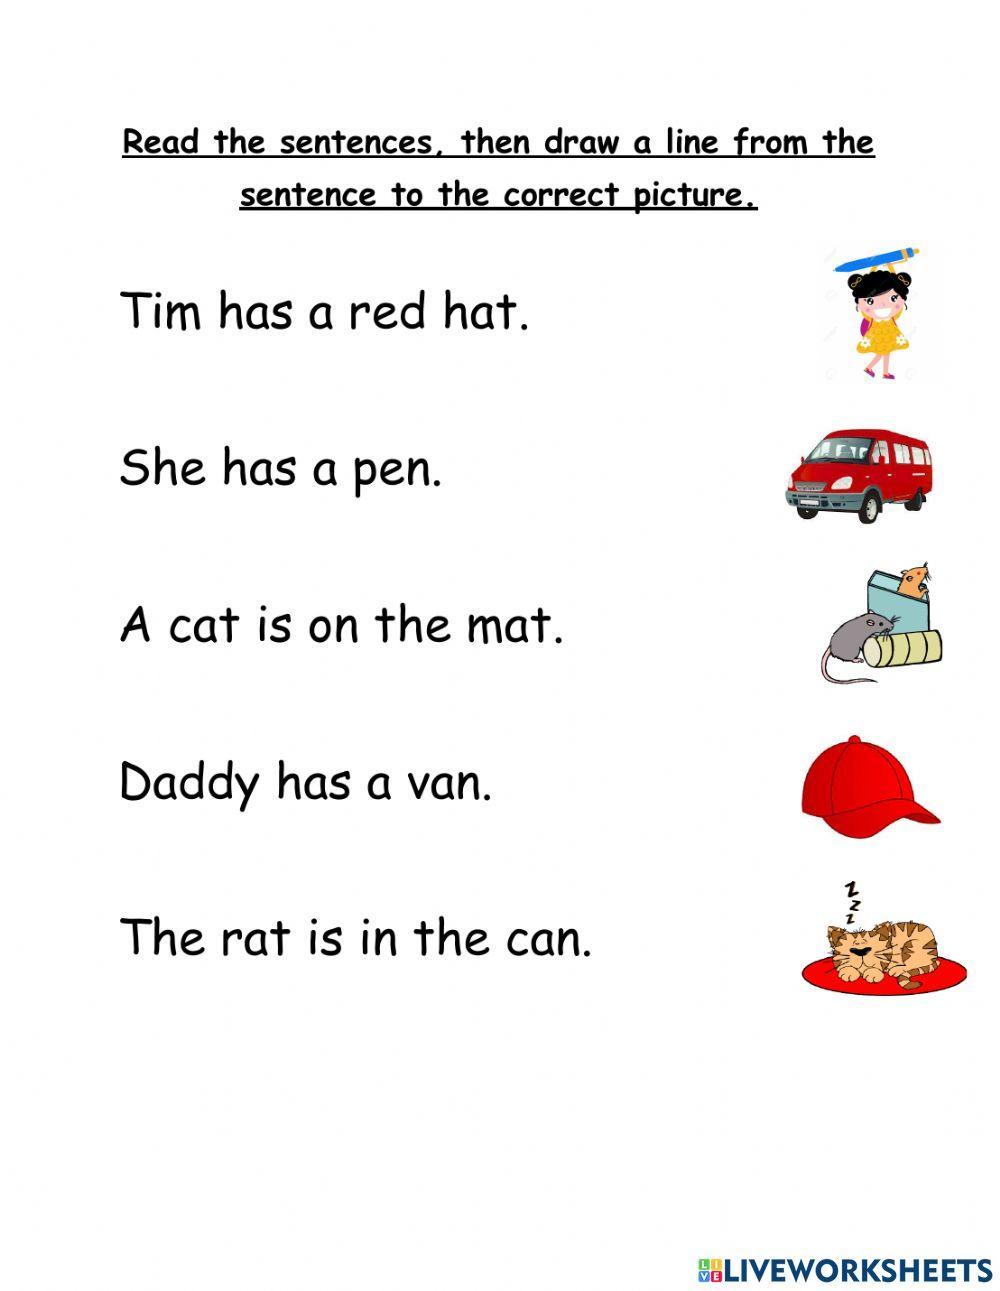 Sentence to picture matching